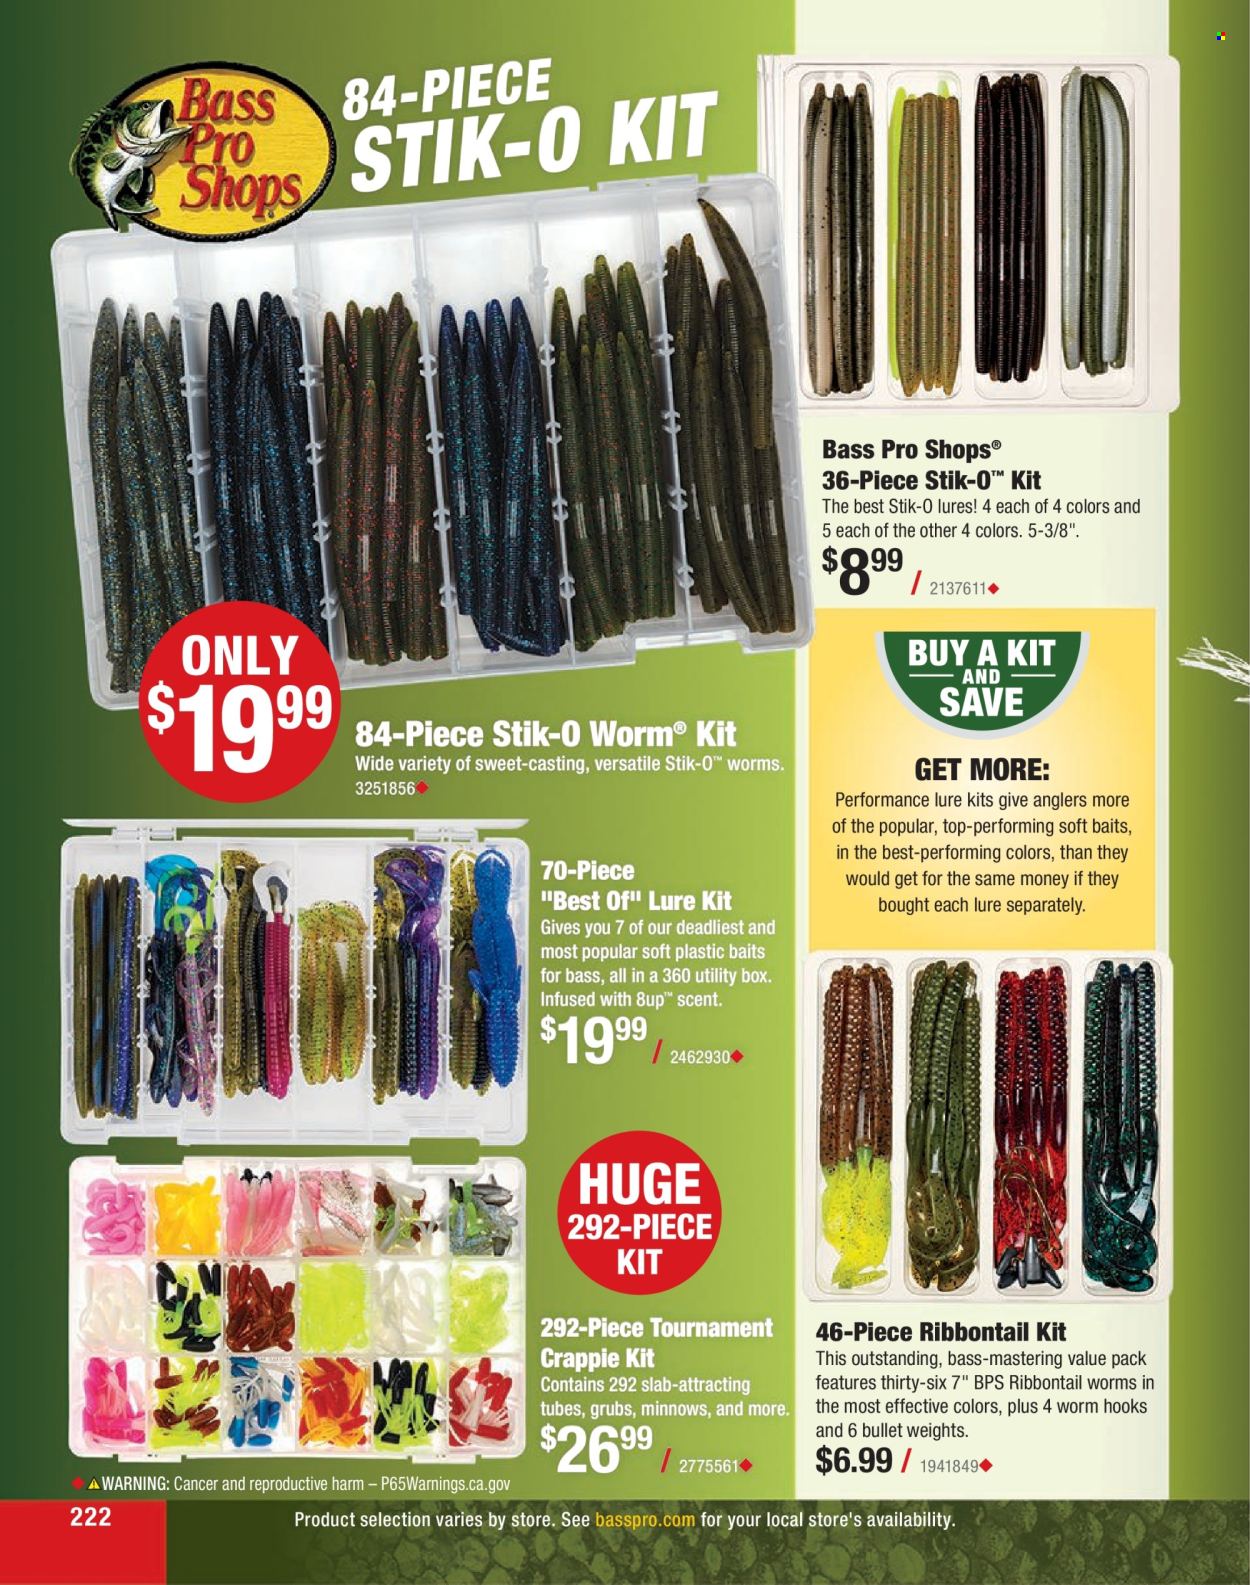 thumbnail - Cabela's Flyer - Sales products - Bass Pro. Page 222.